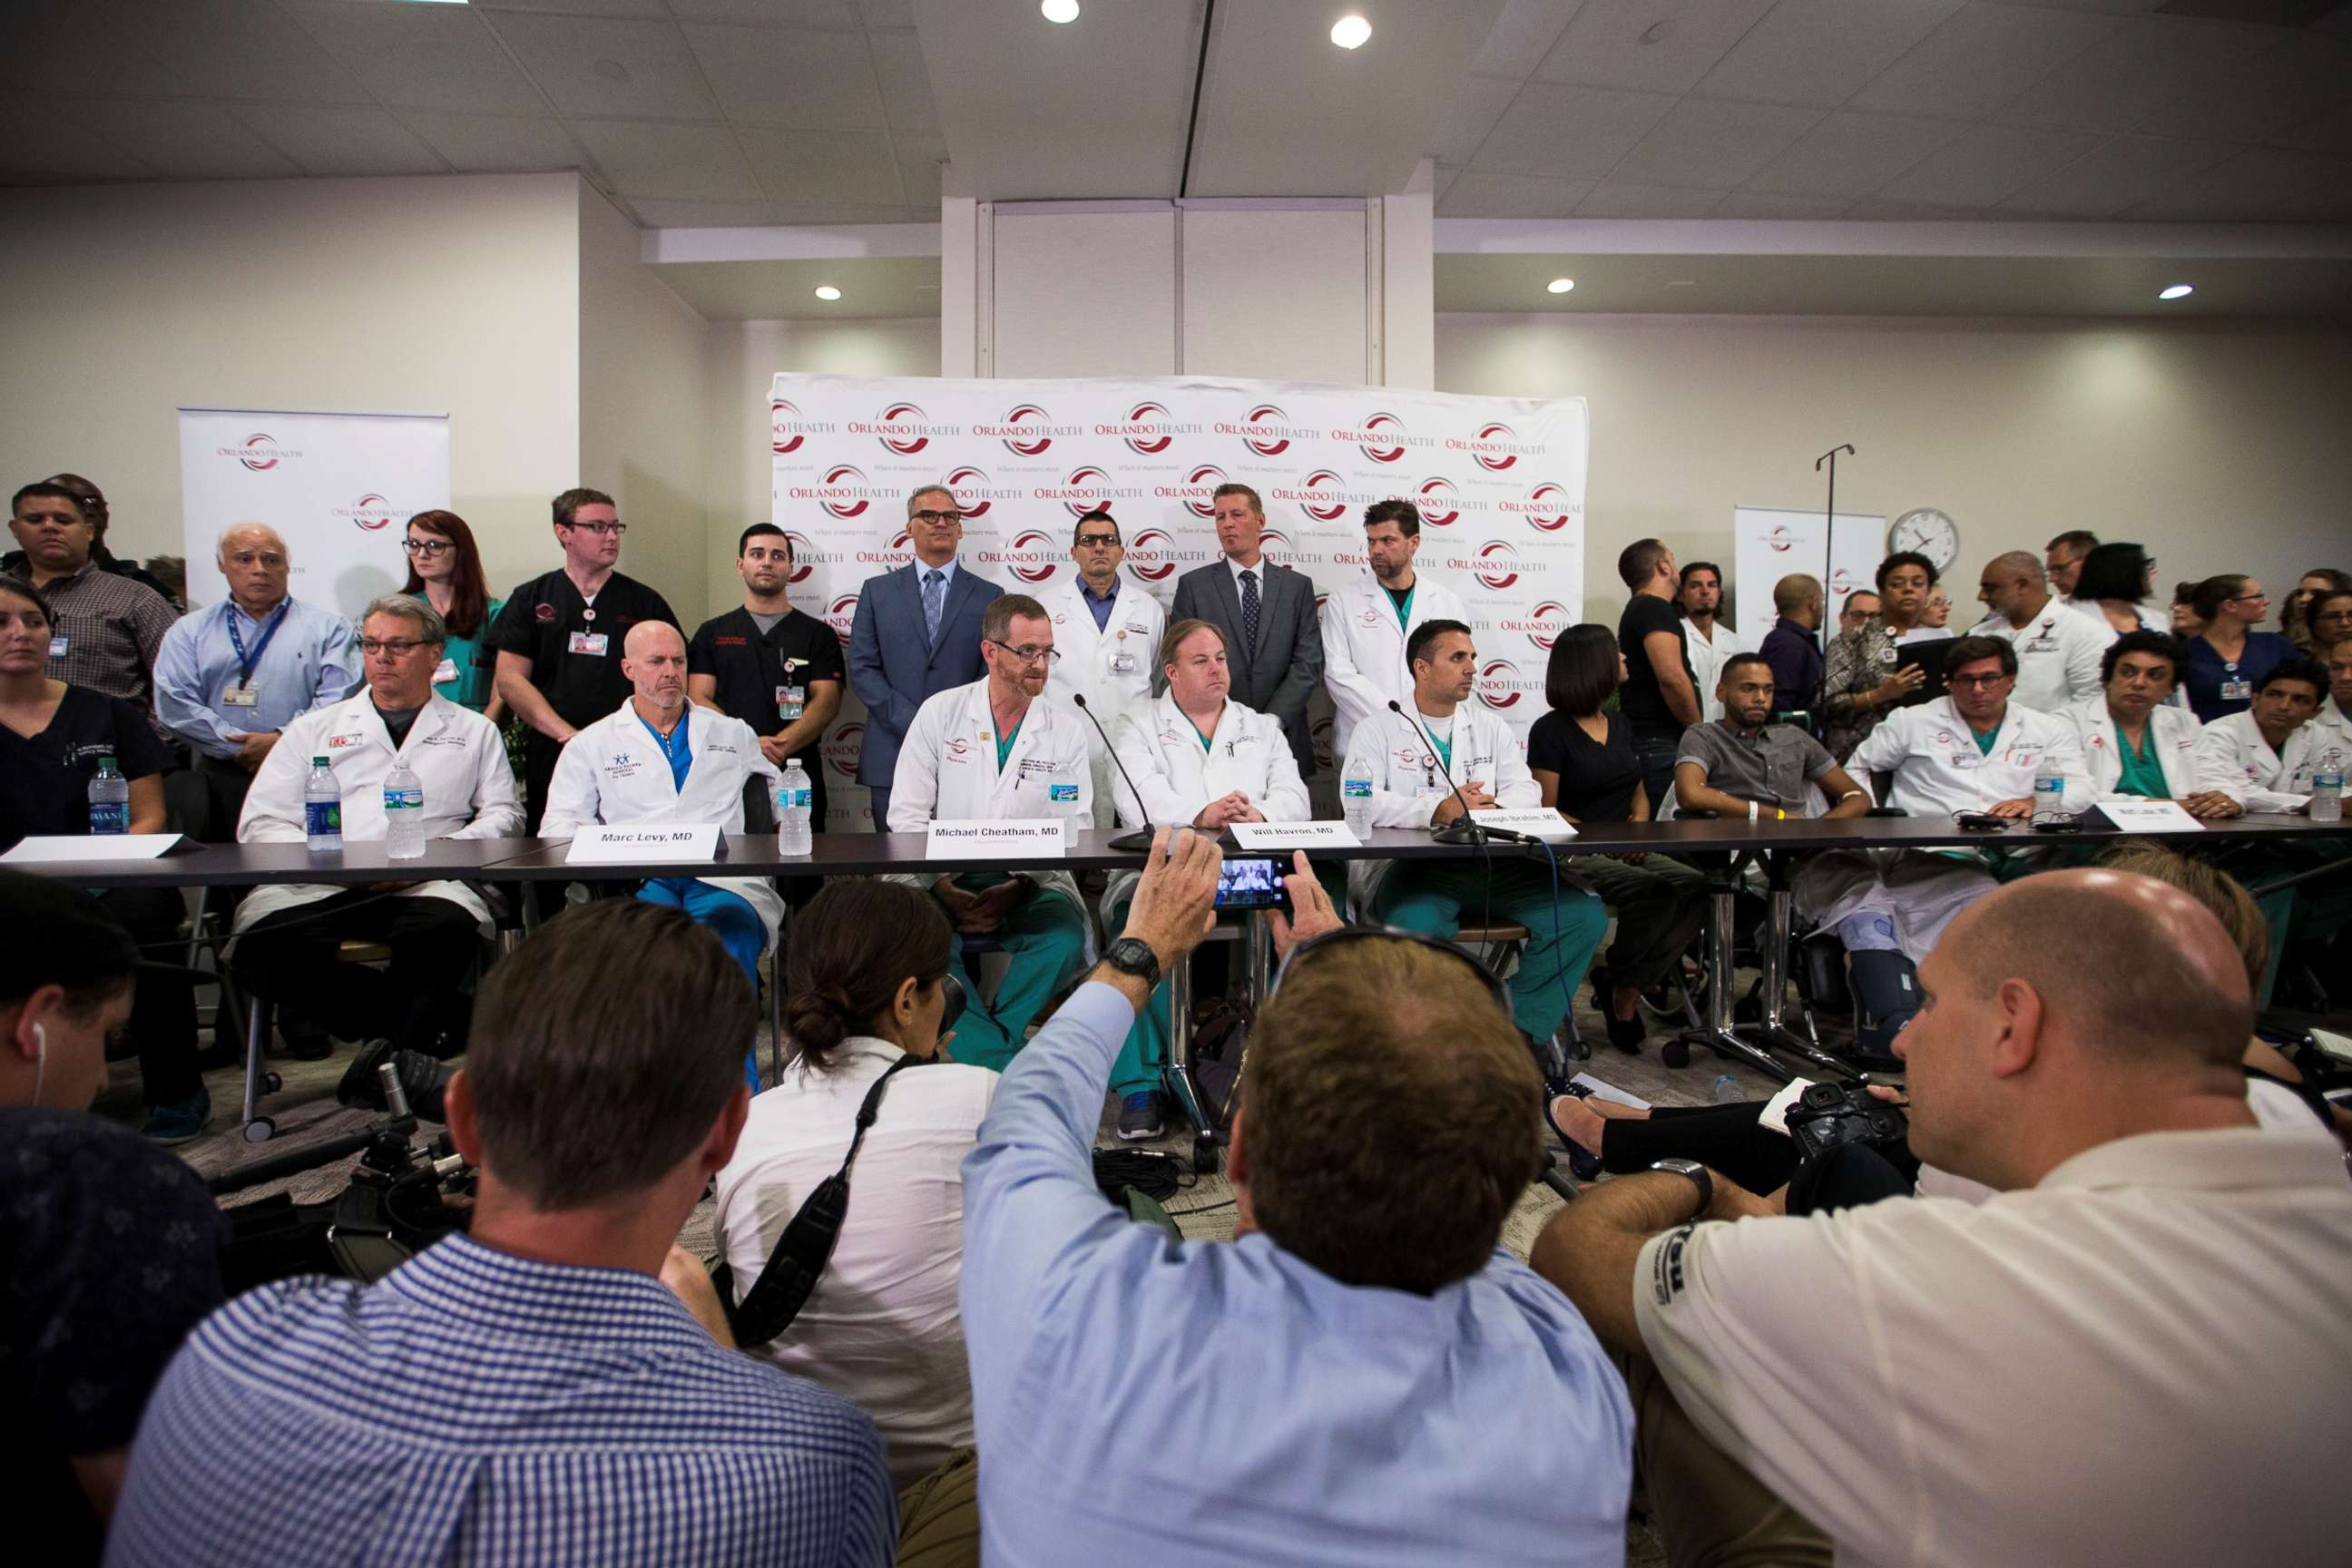 PHOTO: Doctors and medical staff recount how things unfolded at the Emergency Room following the Pulse nightclub massacre during a press conference at the Orlando Regional Medical Center in Orlando, Fl. on June 14, 2016.